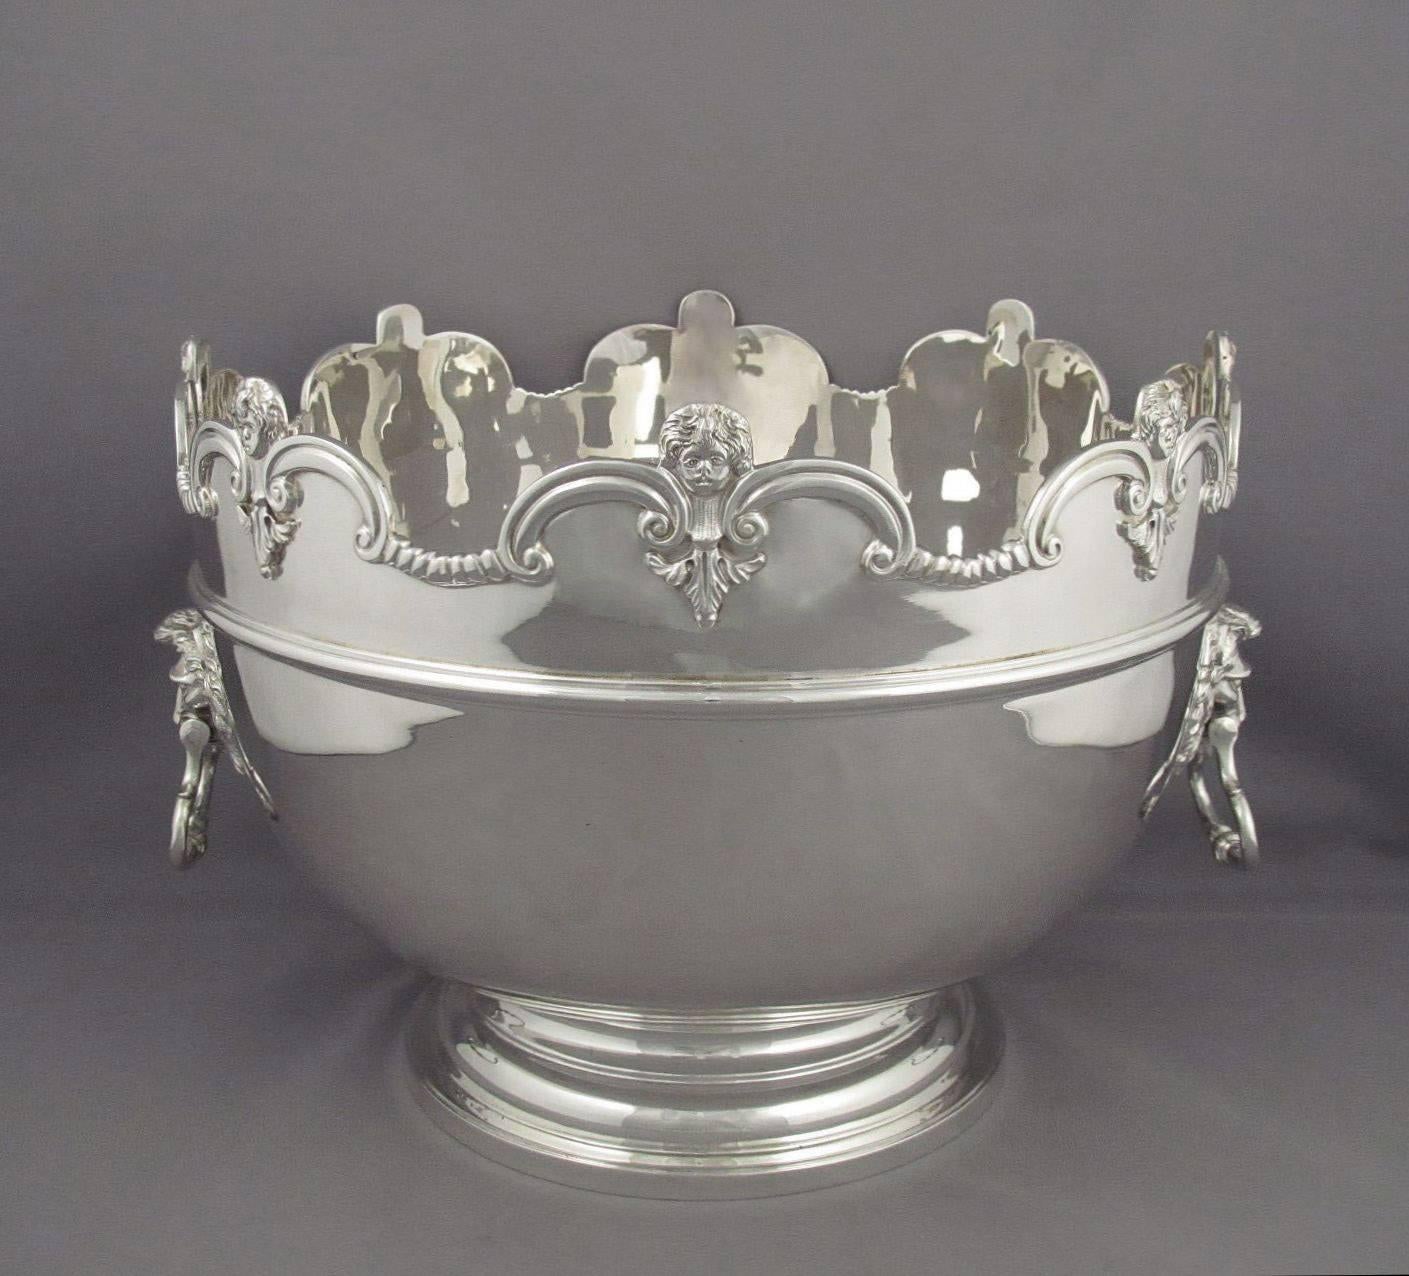 A rare set of three sterling English silver Monteith bowls by Crichton Brothers, hallmarked London 1912. A stunning suite of silver Monteiths consisting of a punch bowl and two rose bowls, each circular on spreading foot with notched rim with mask